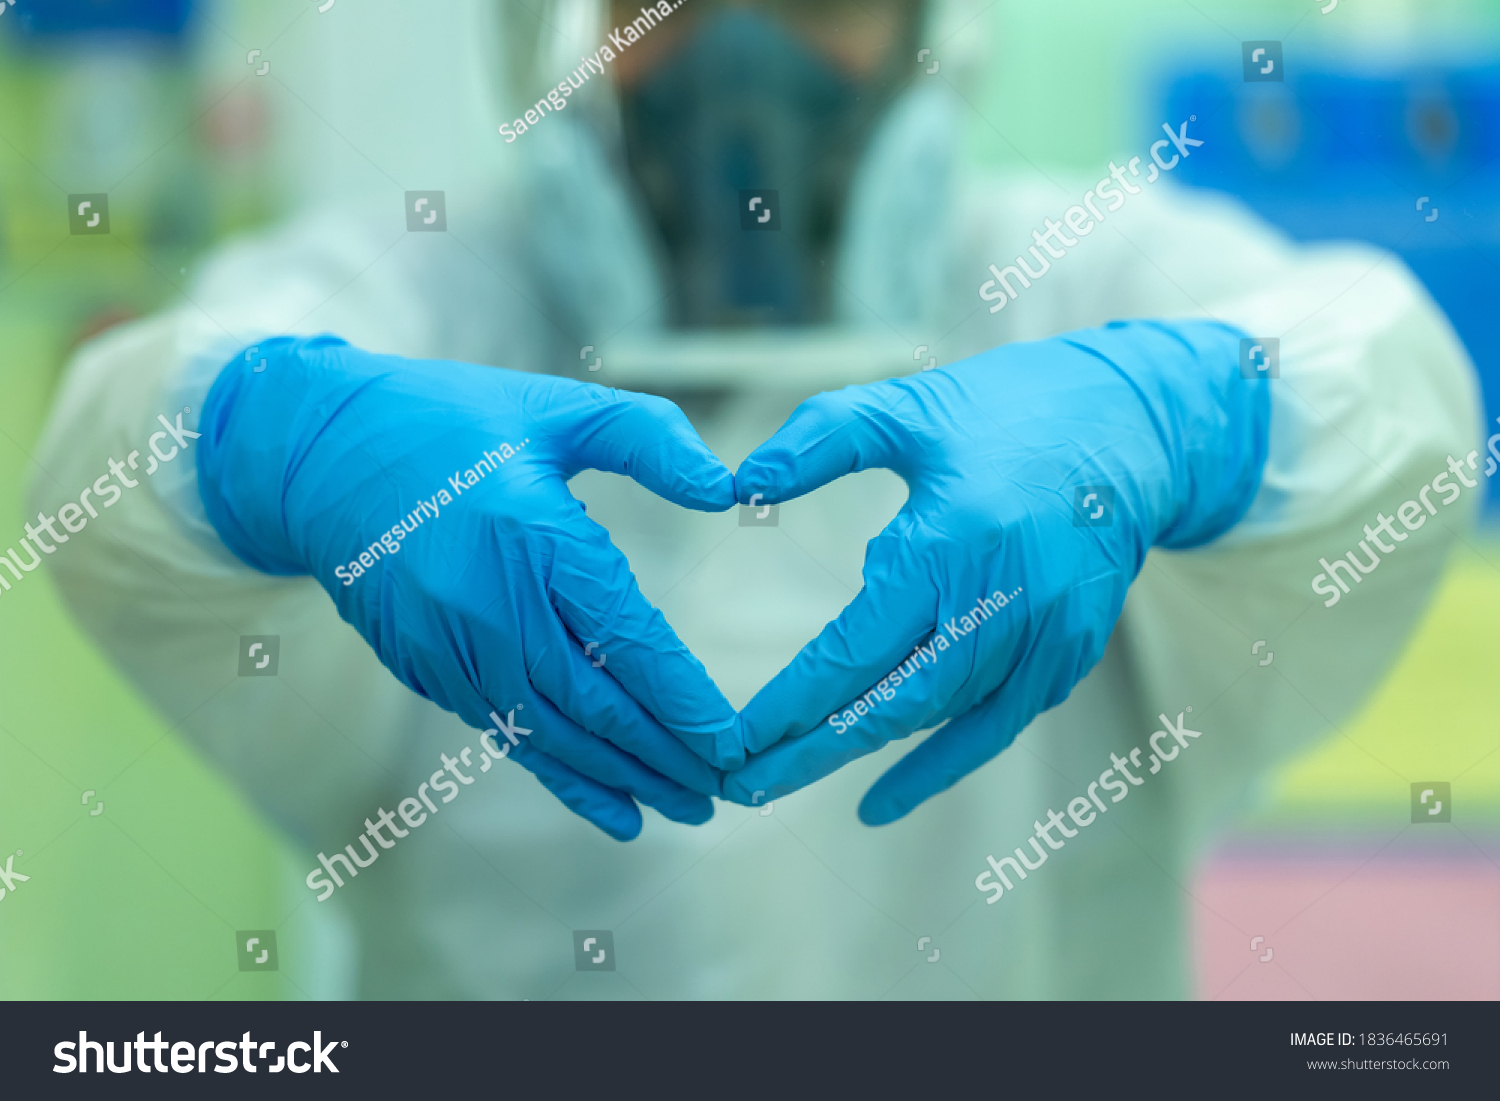 The doctor is encouraging patients and relatives infected with COVID after the treatment of patients. Doctor with a medical mask and hands in latex glove shows the symbol of the heart.  #1836465691